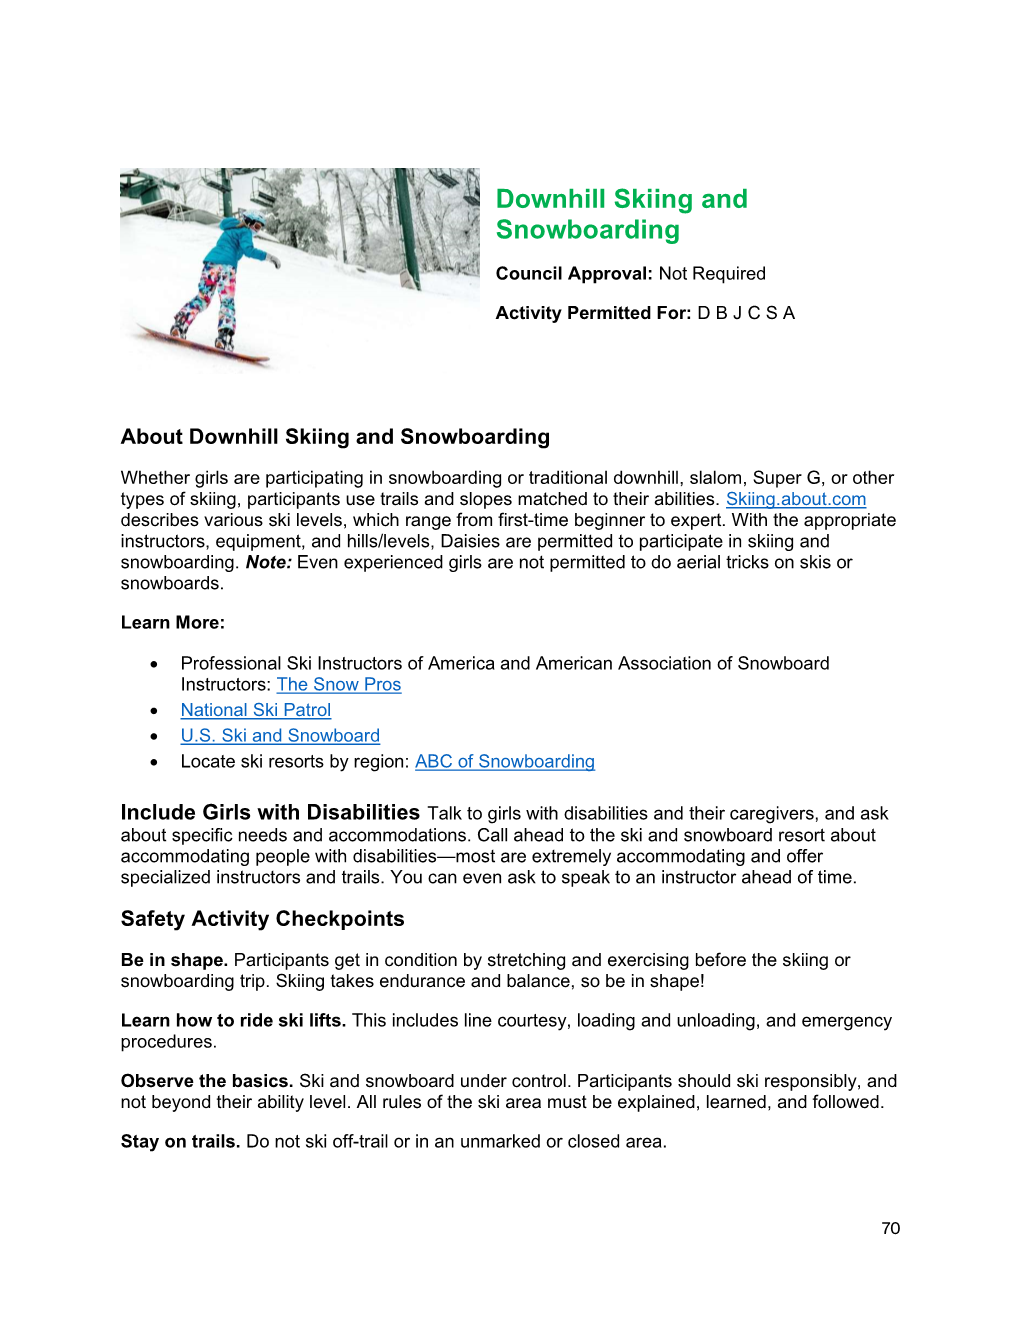 Downhill Skiing and Snowboarding